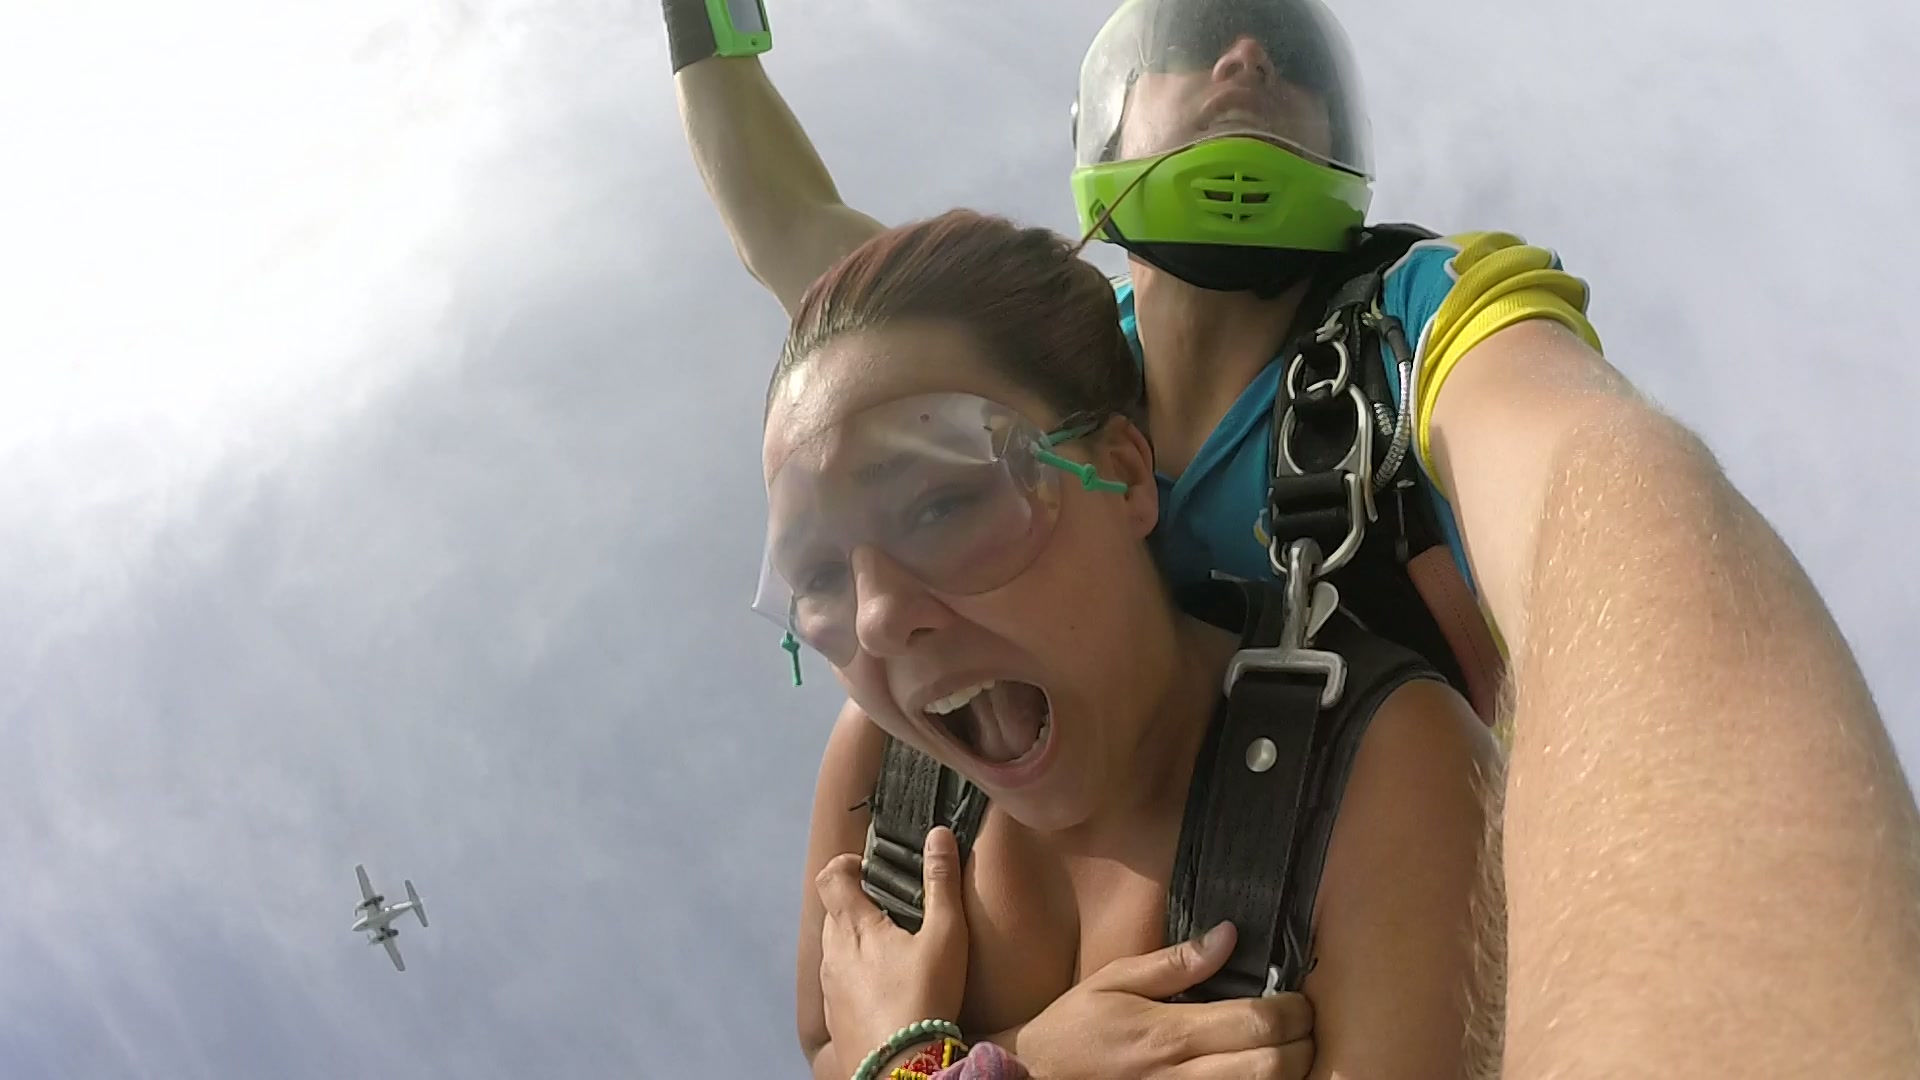 Girl doing a skydive